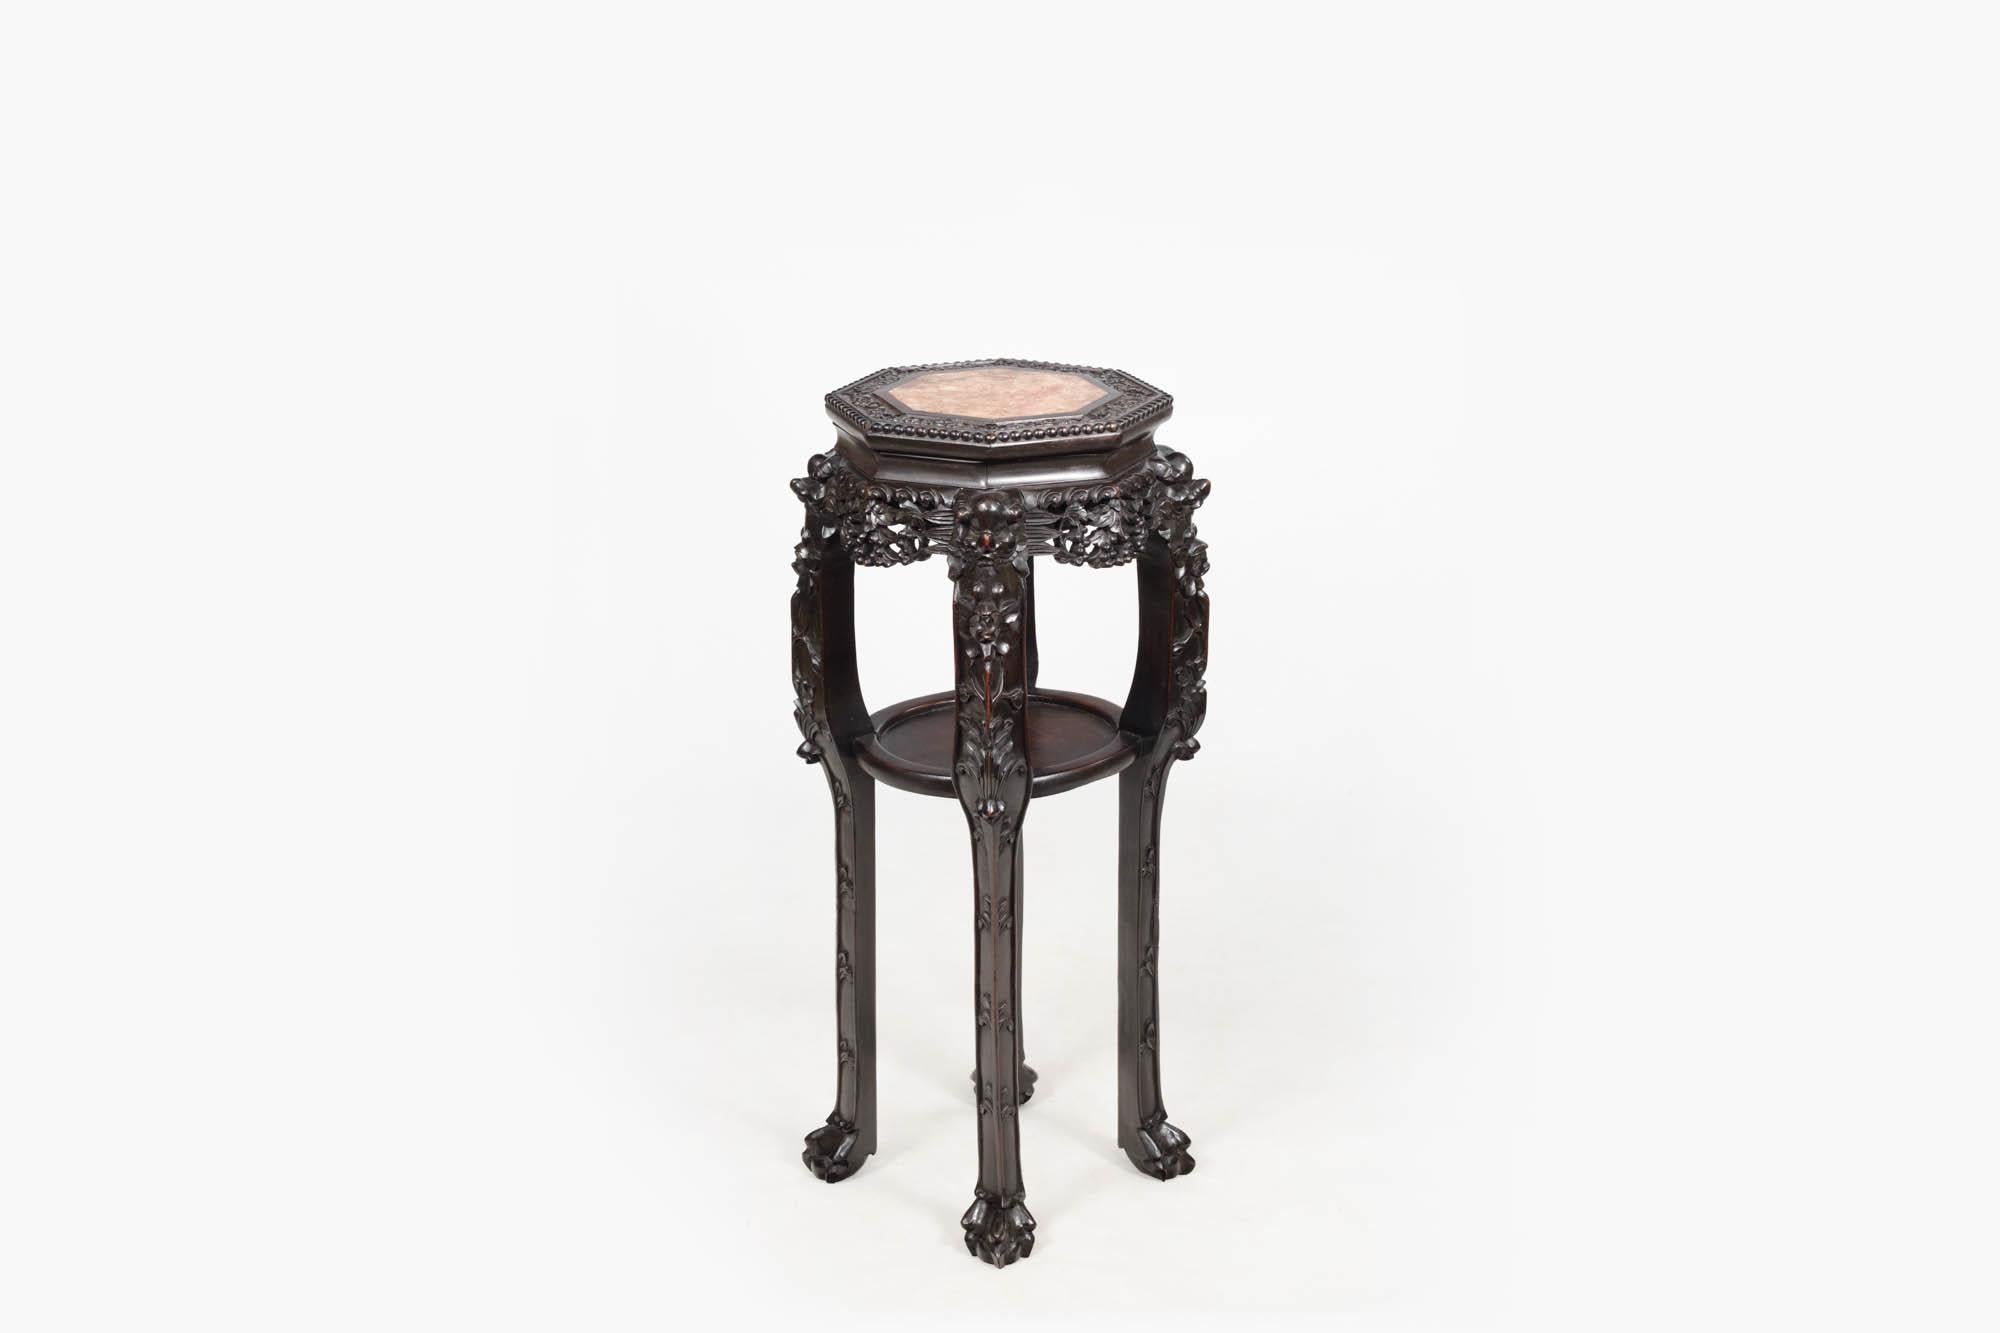 19th century Qing Dynasty Chinese cherrywood pedestal plant stand. The highly carved top features floral relief, and beaded trim and is inset with pink marble. There is a simple round inner center shelf and the piece is raised on four carved